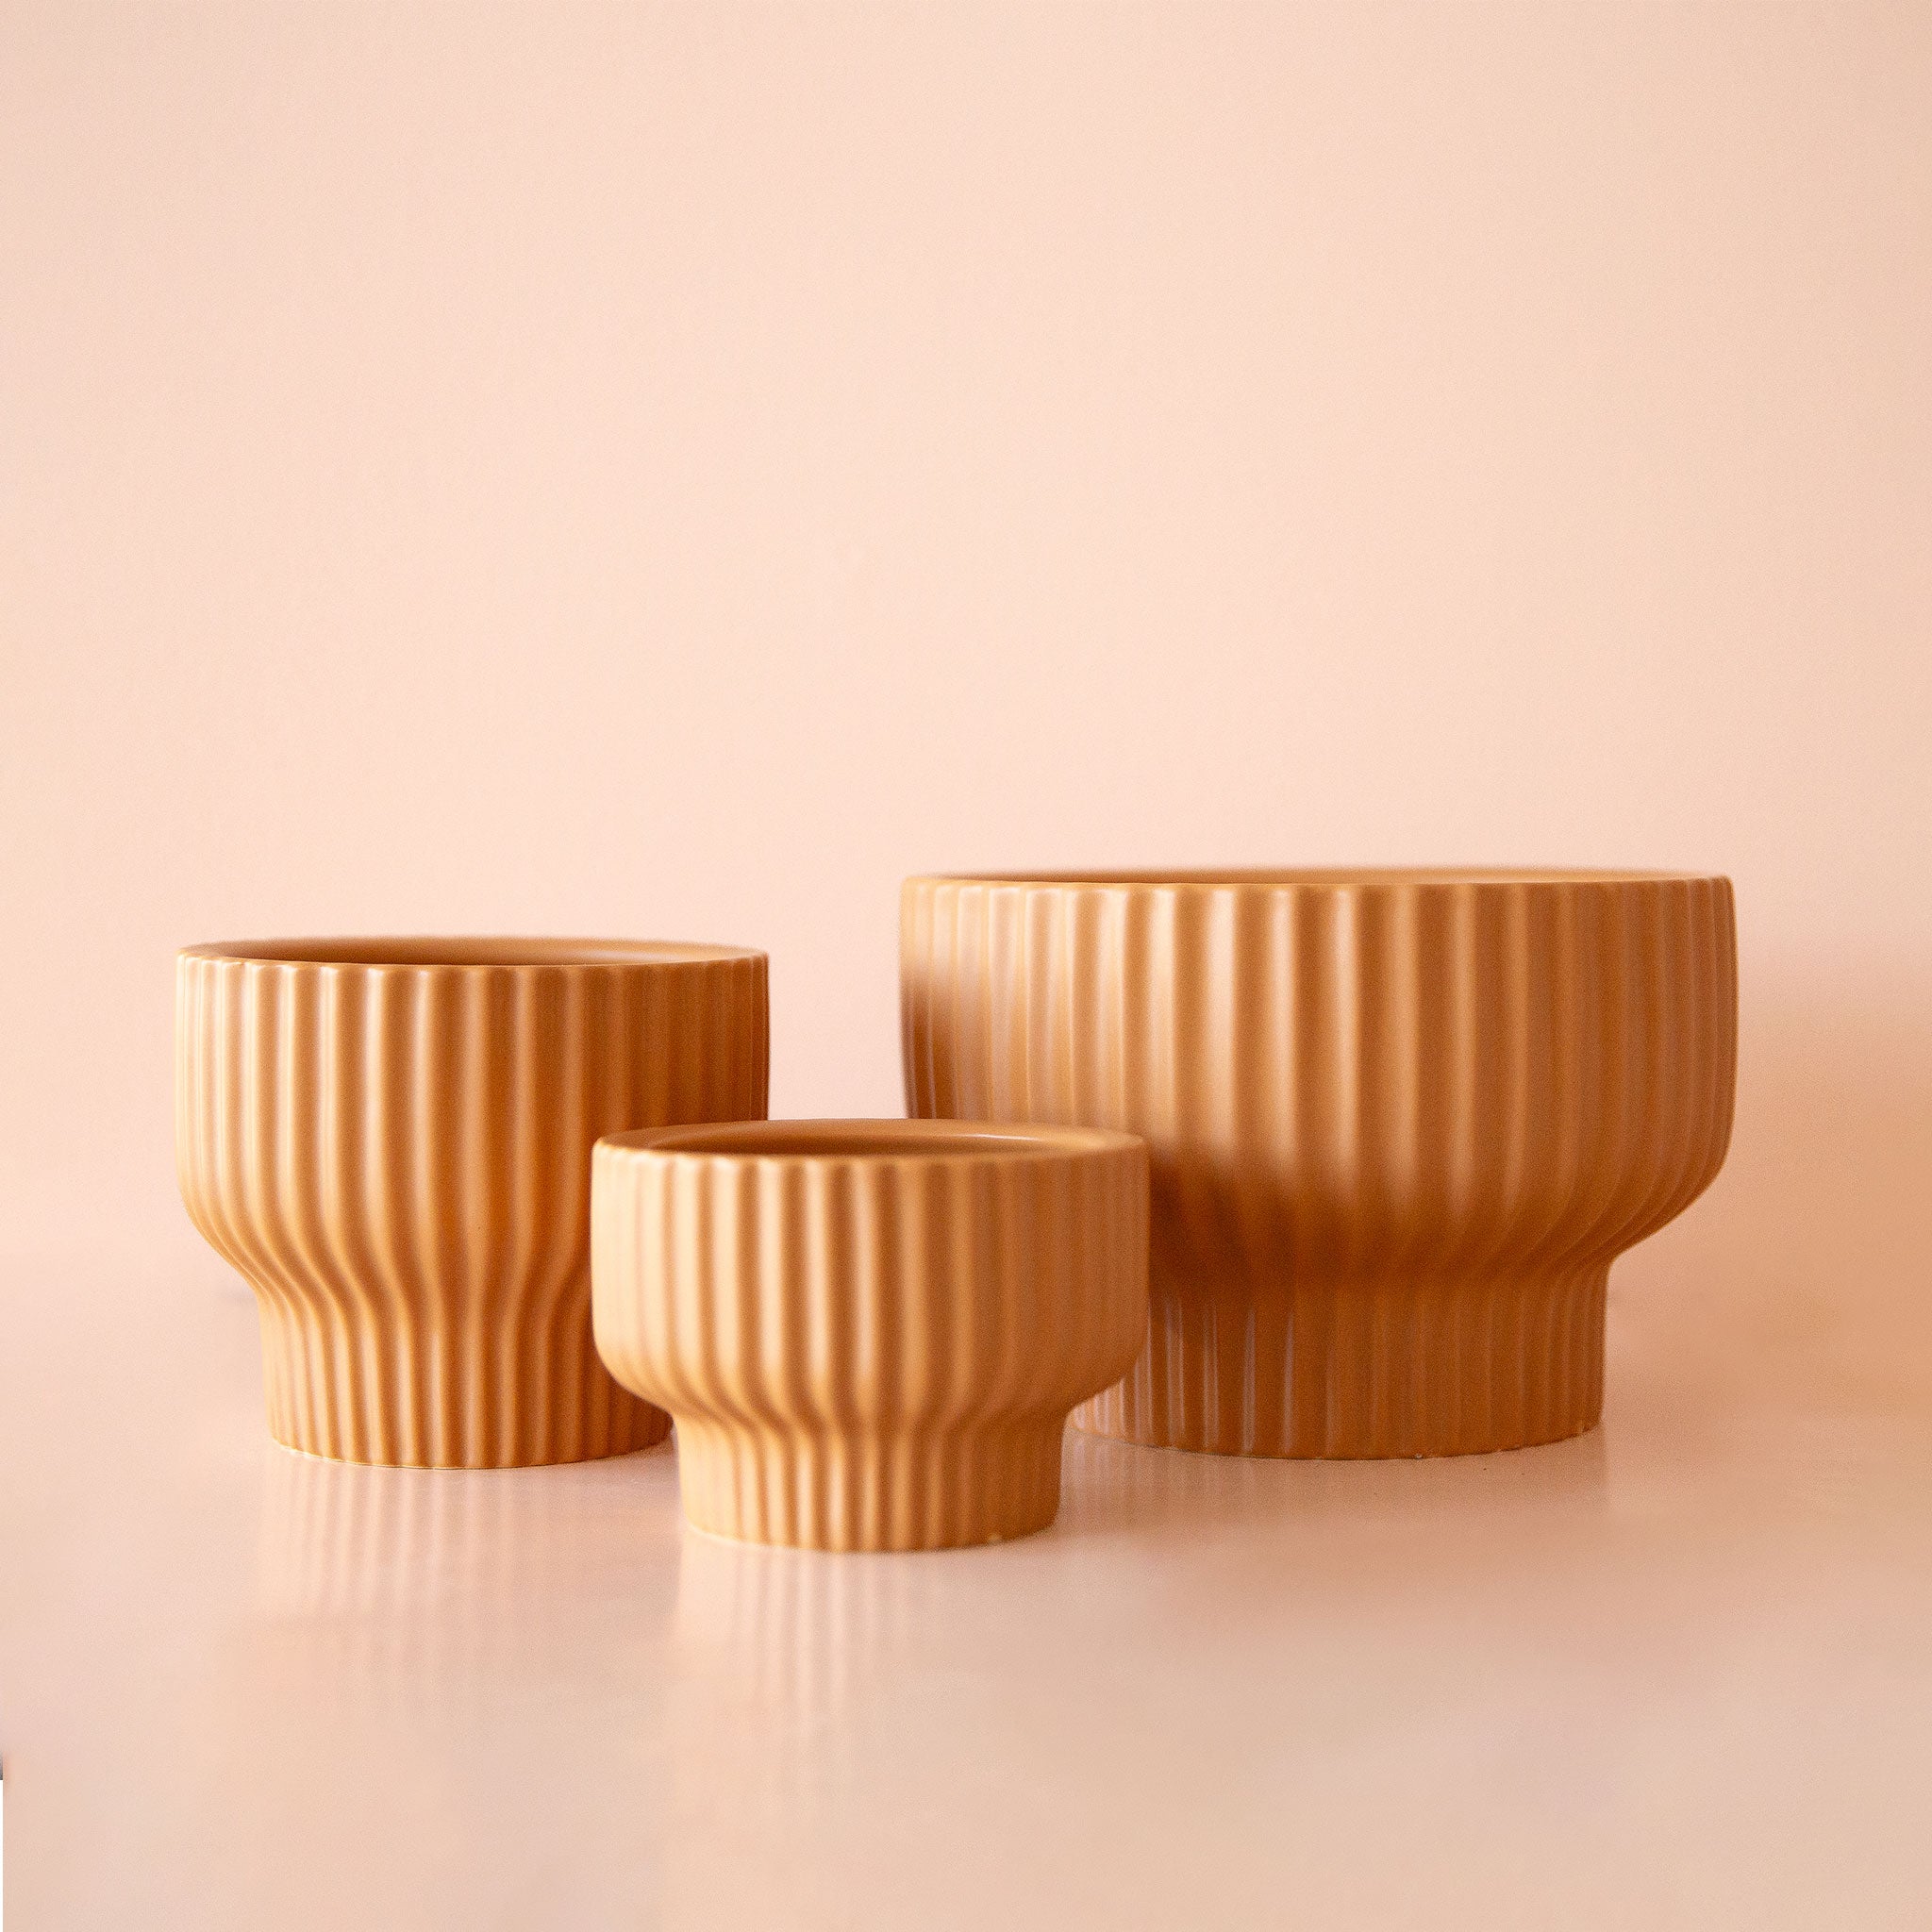 On a peachy background is a burnt orange colored ribbed pedestal planter in three different sizes.